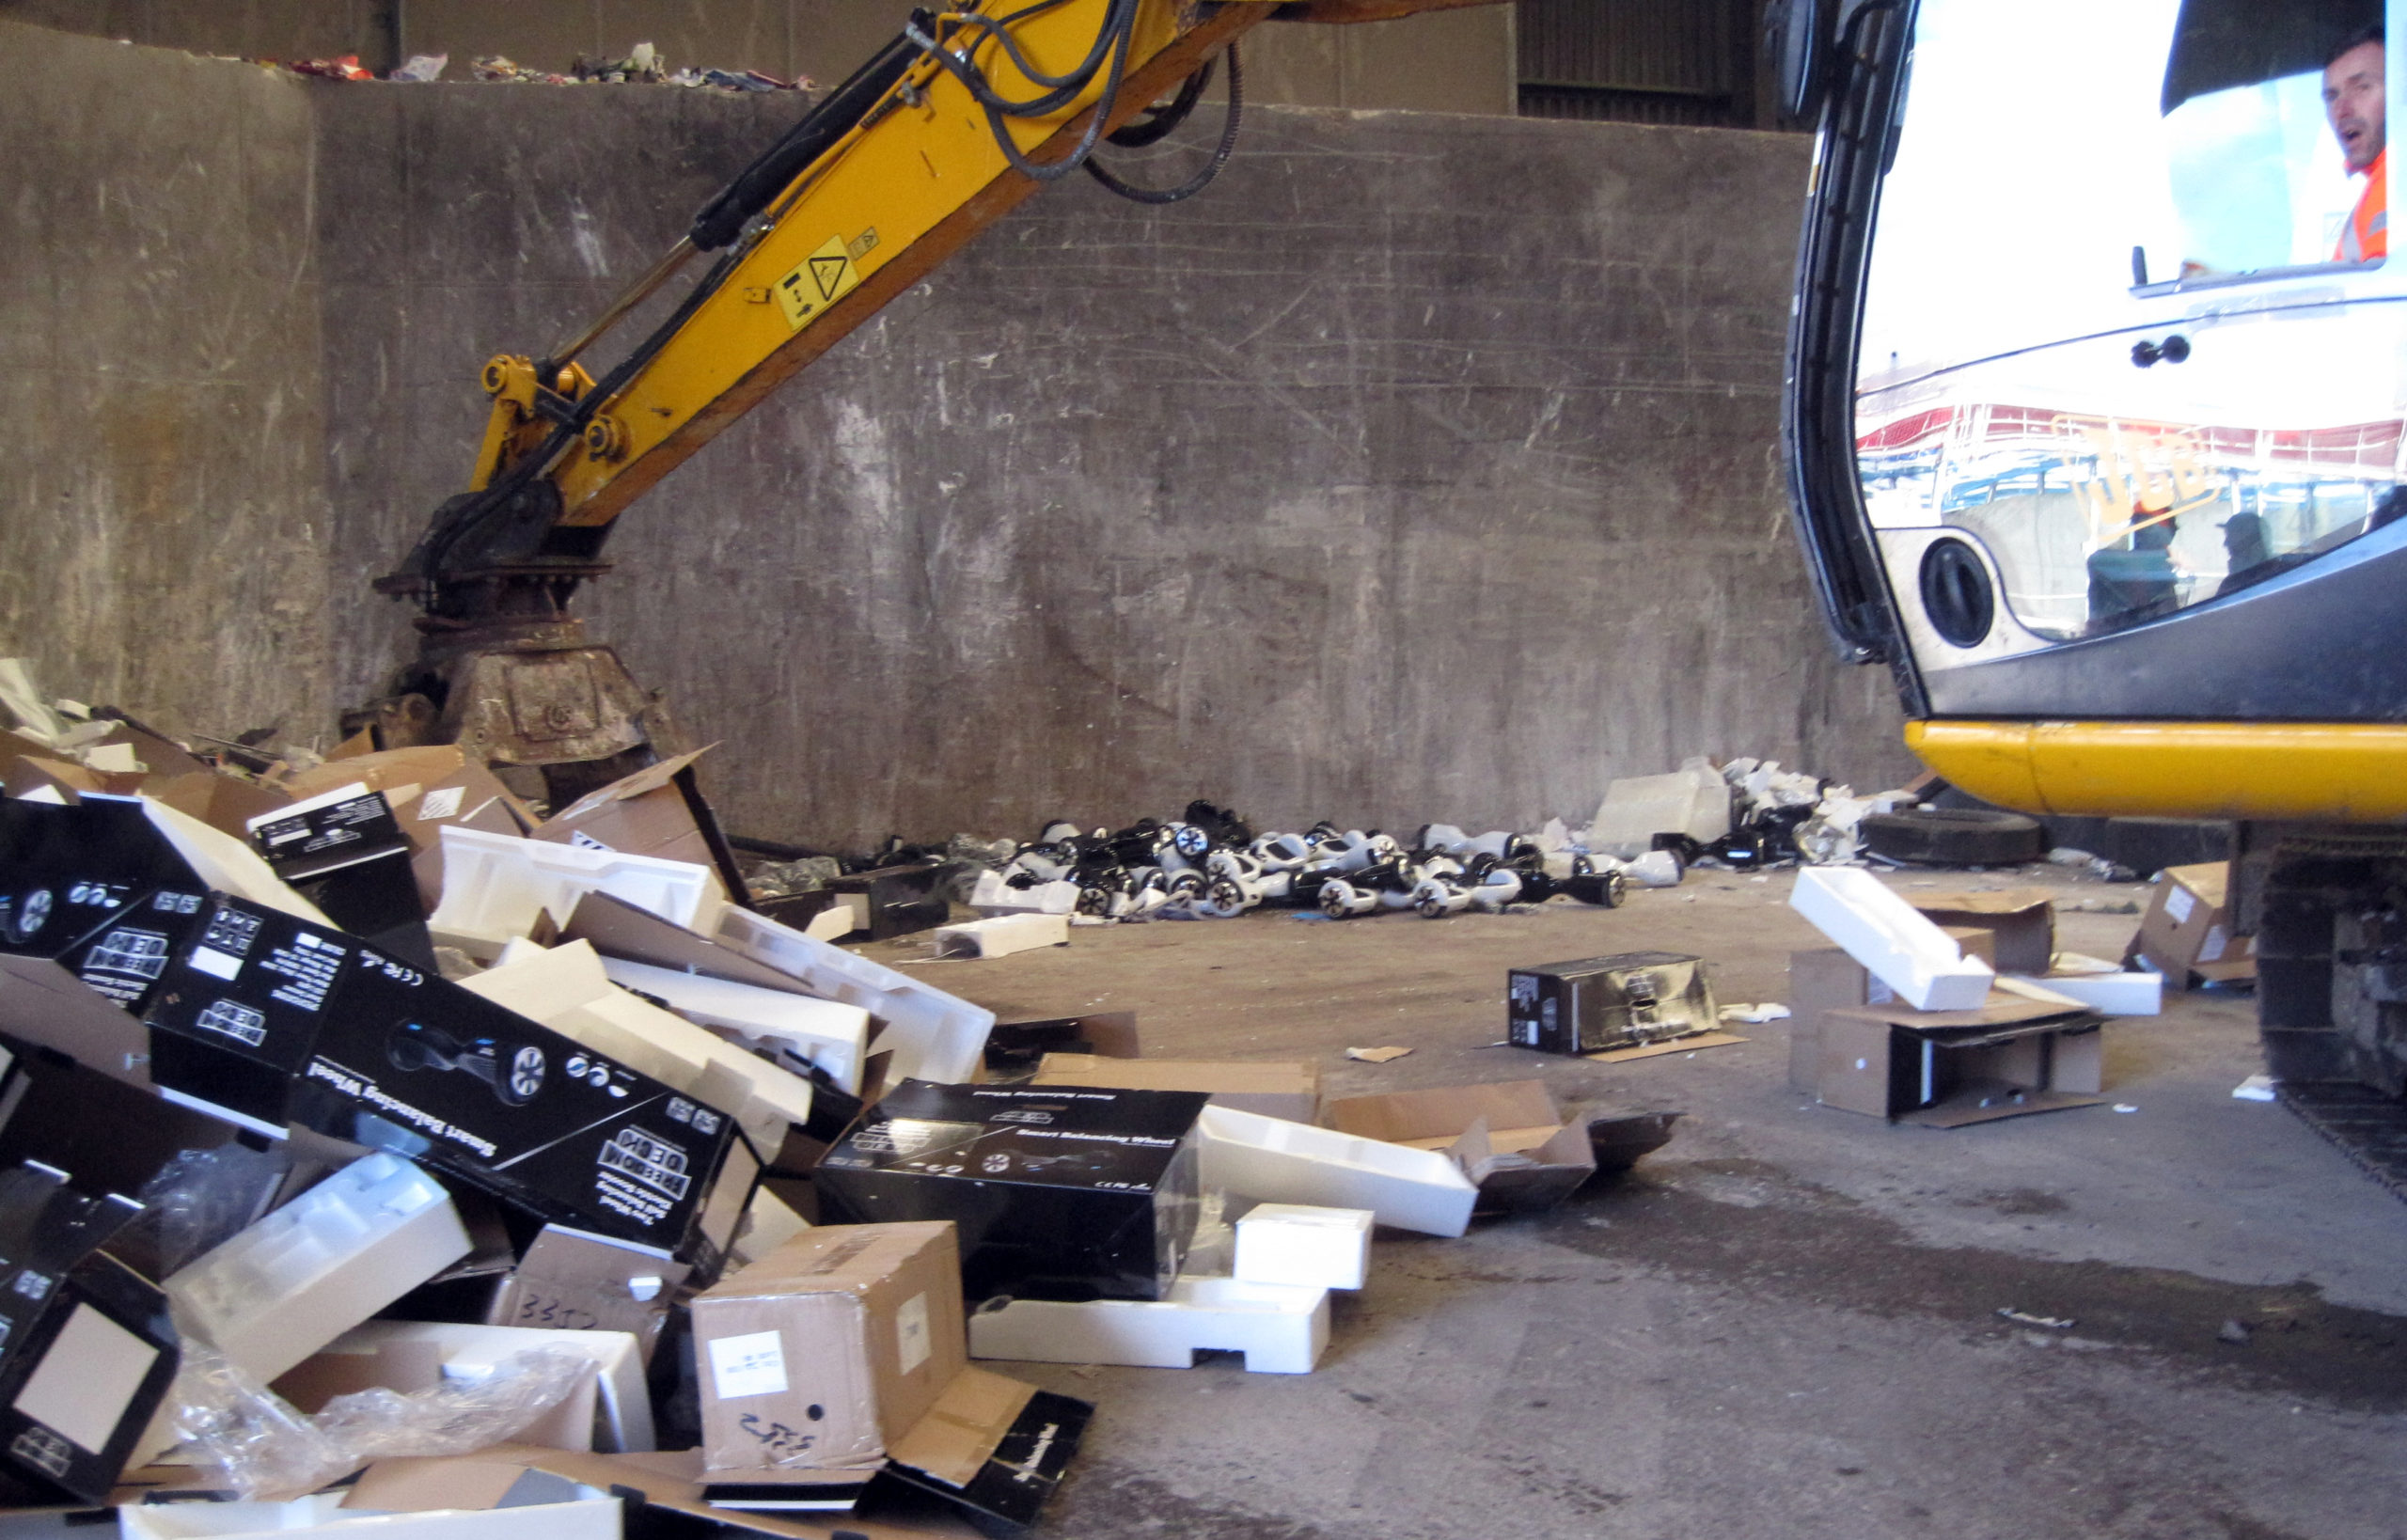 Feast Your Eyes On The Glory Of 90 Hoverboards In A Giant, Exploded Pile